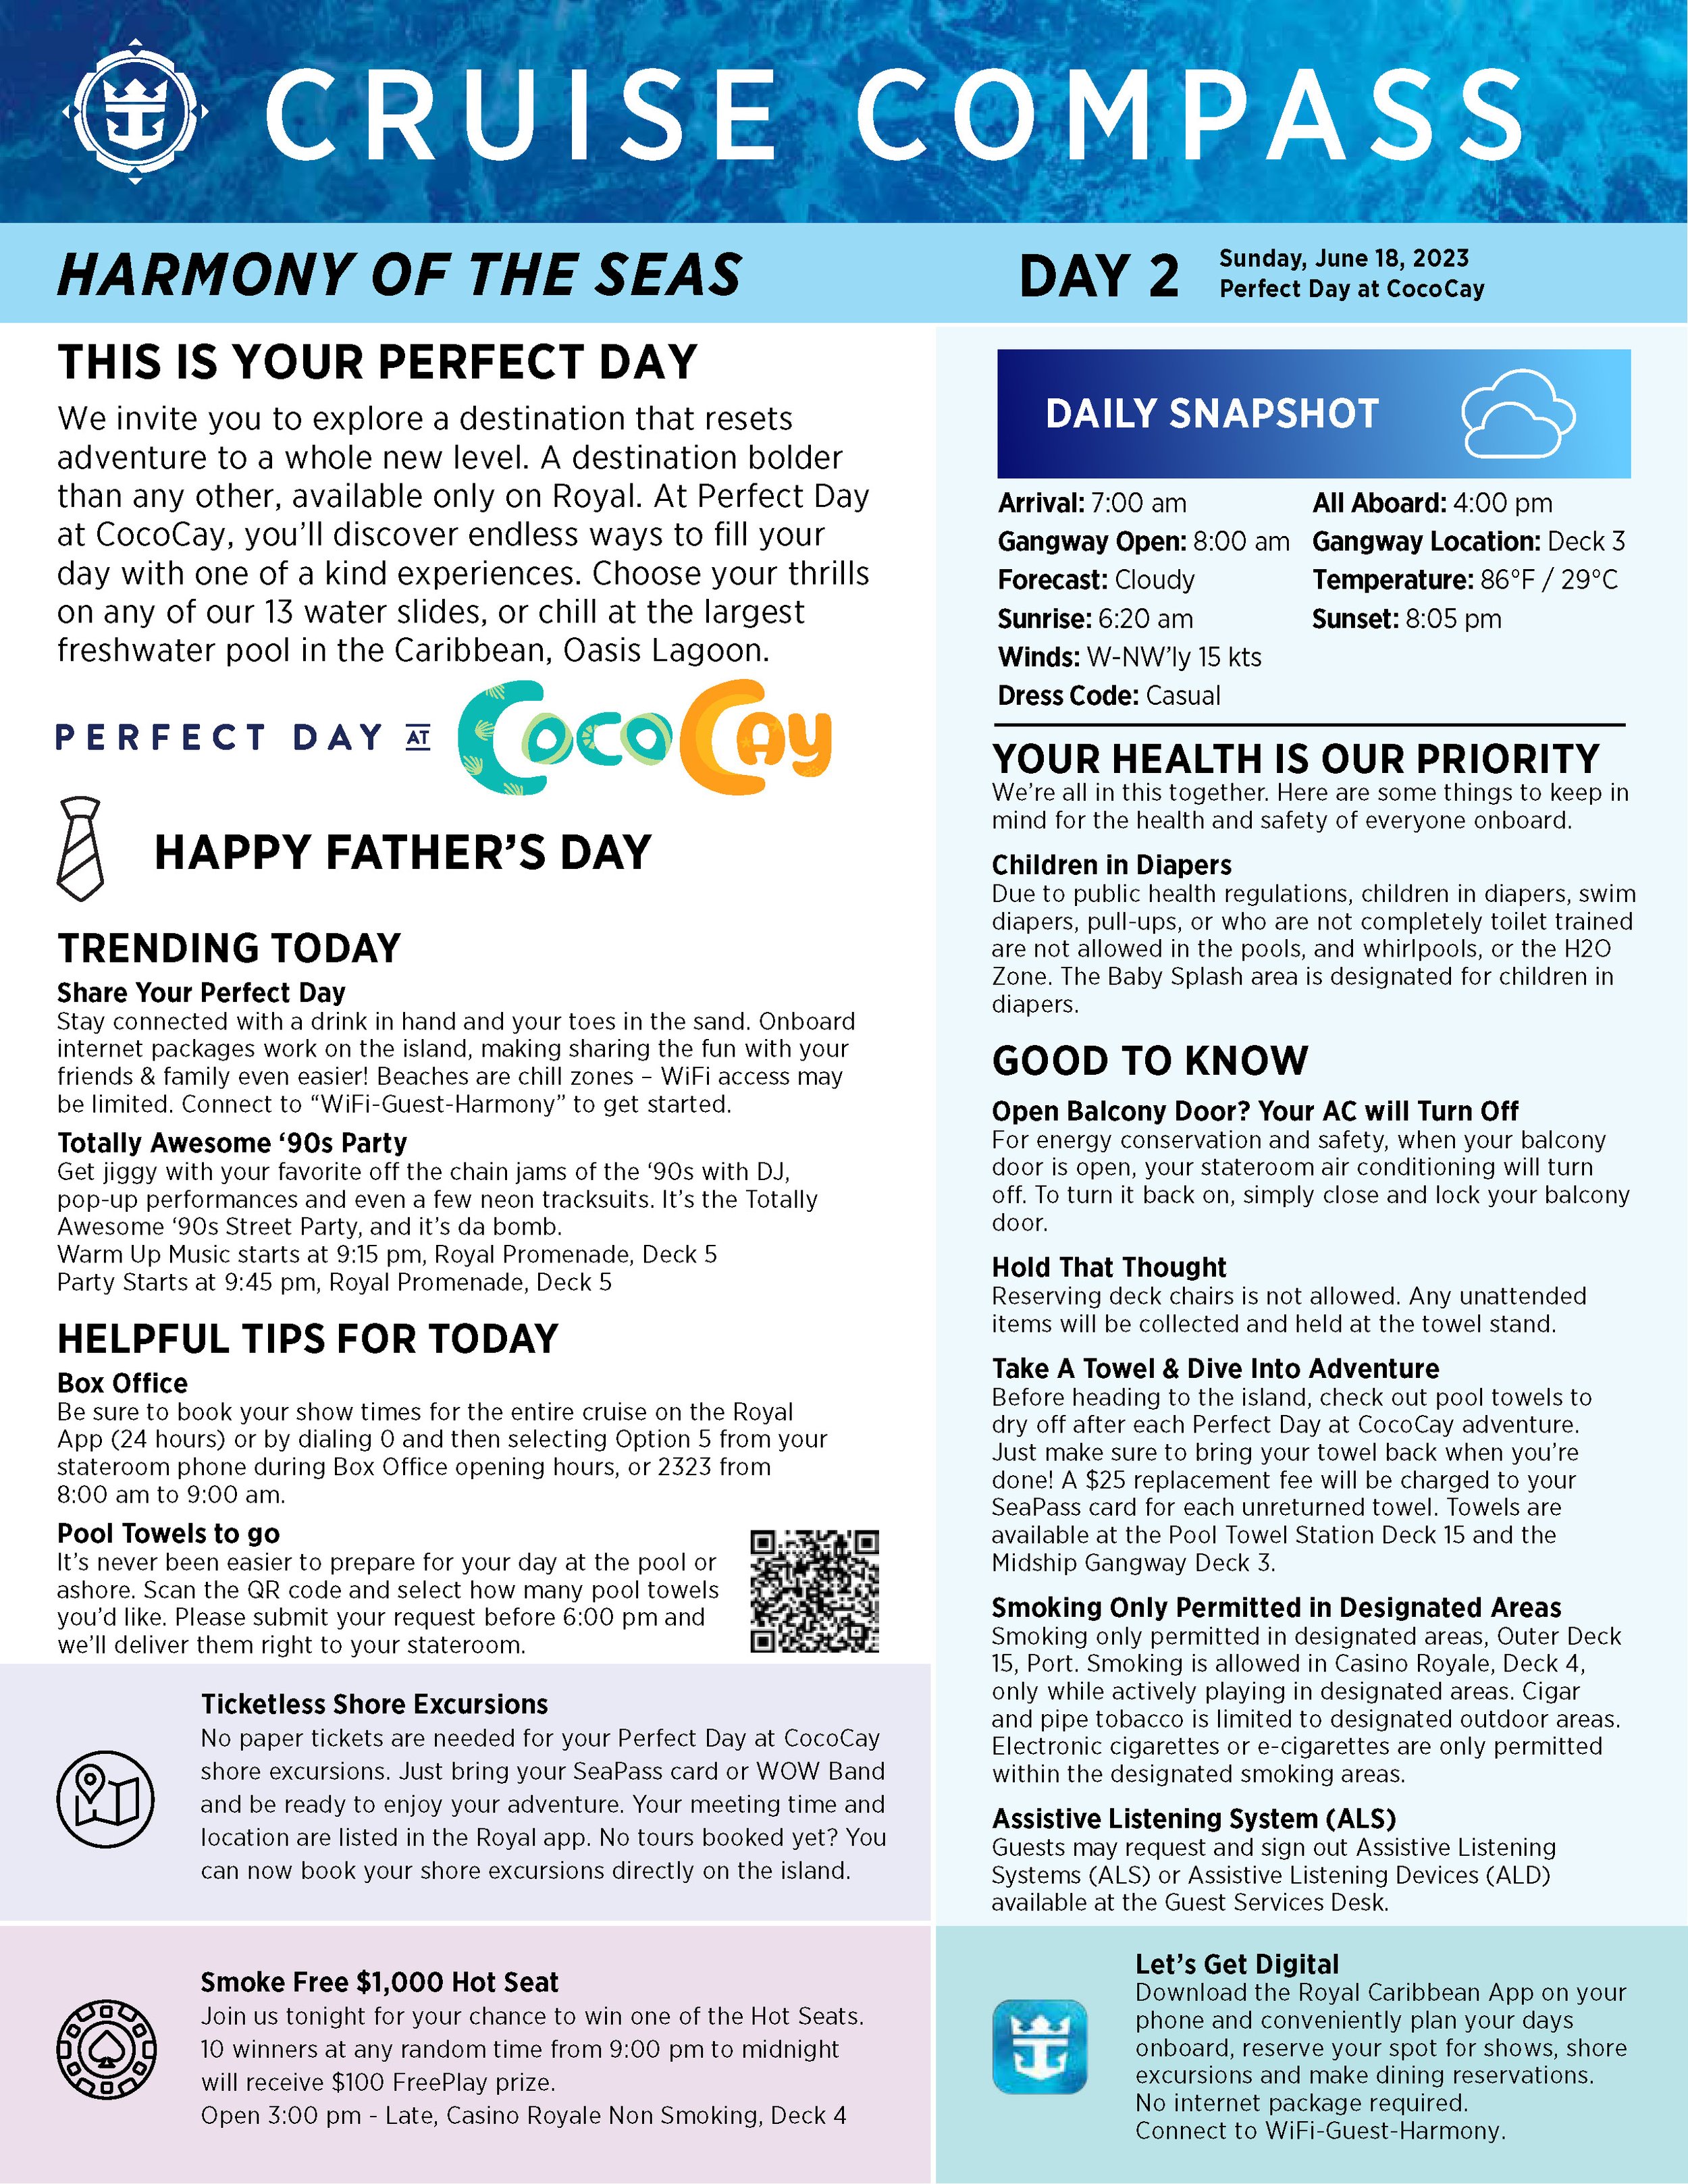 Harmony_of_the_Seas - Day 02 - Cococay - 2023 - June 18 - Page 01.jpg